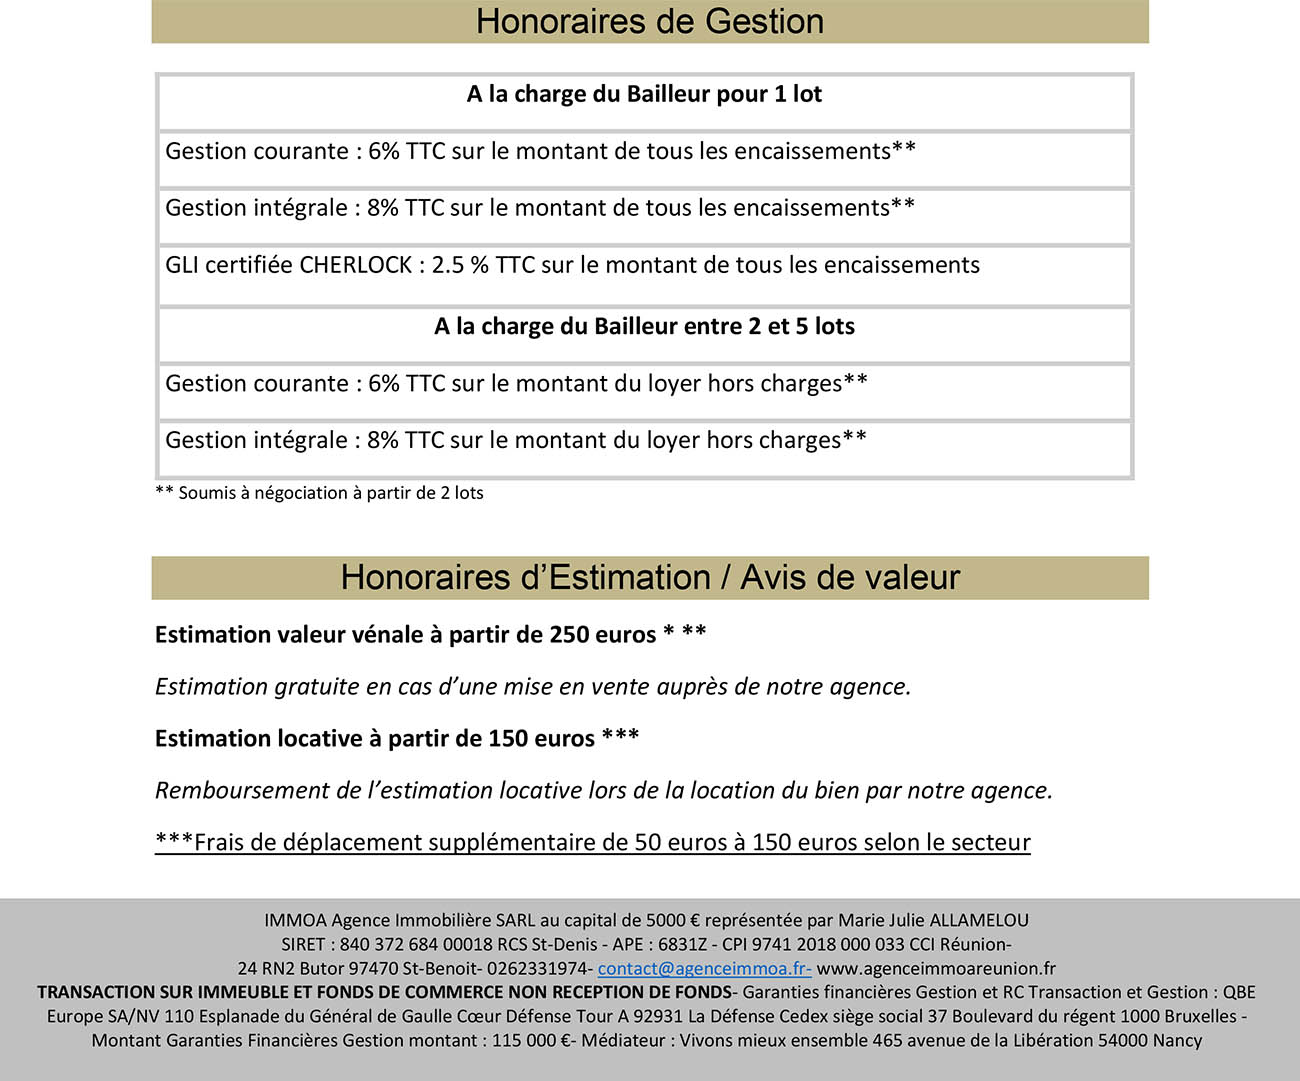 Honoraires Immoa 130622 3